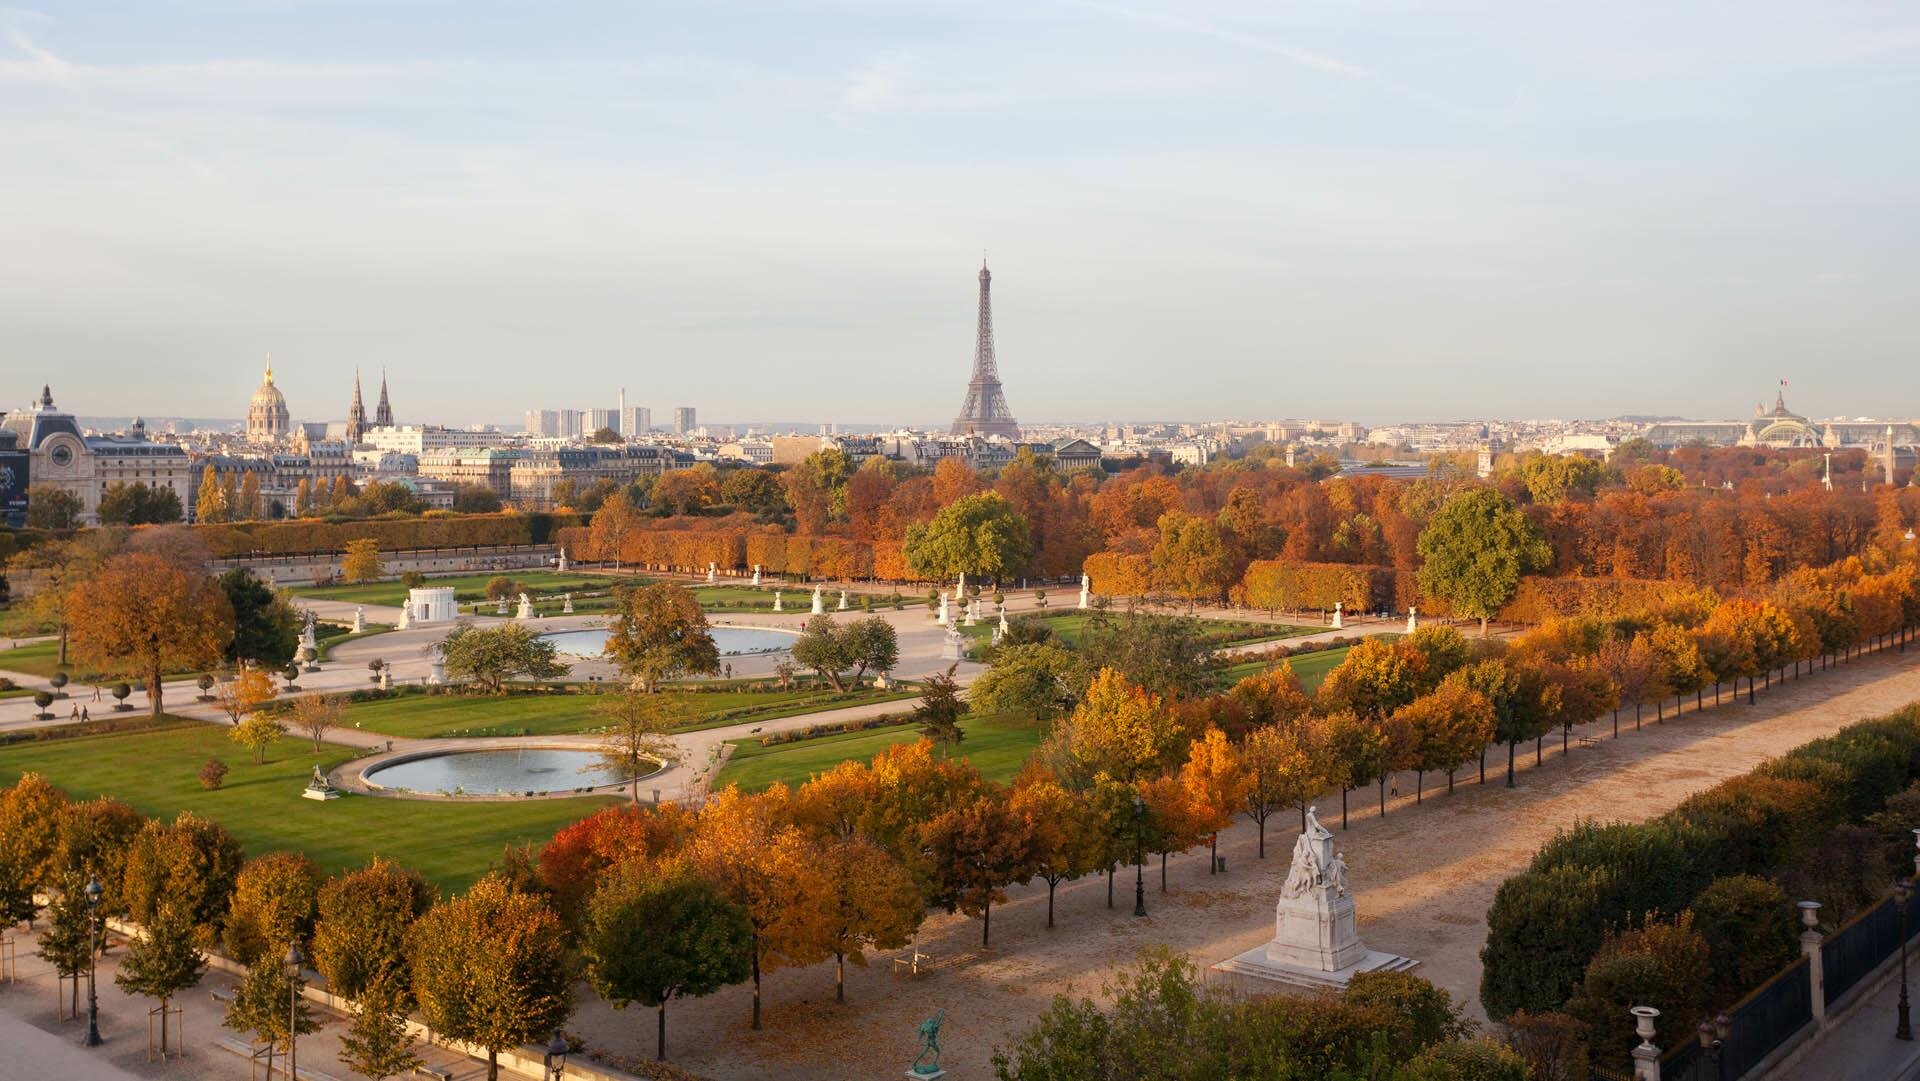 Eiffel tower and Tuileries Garden view